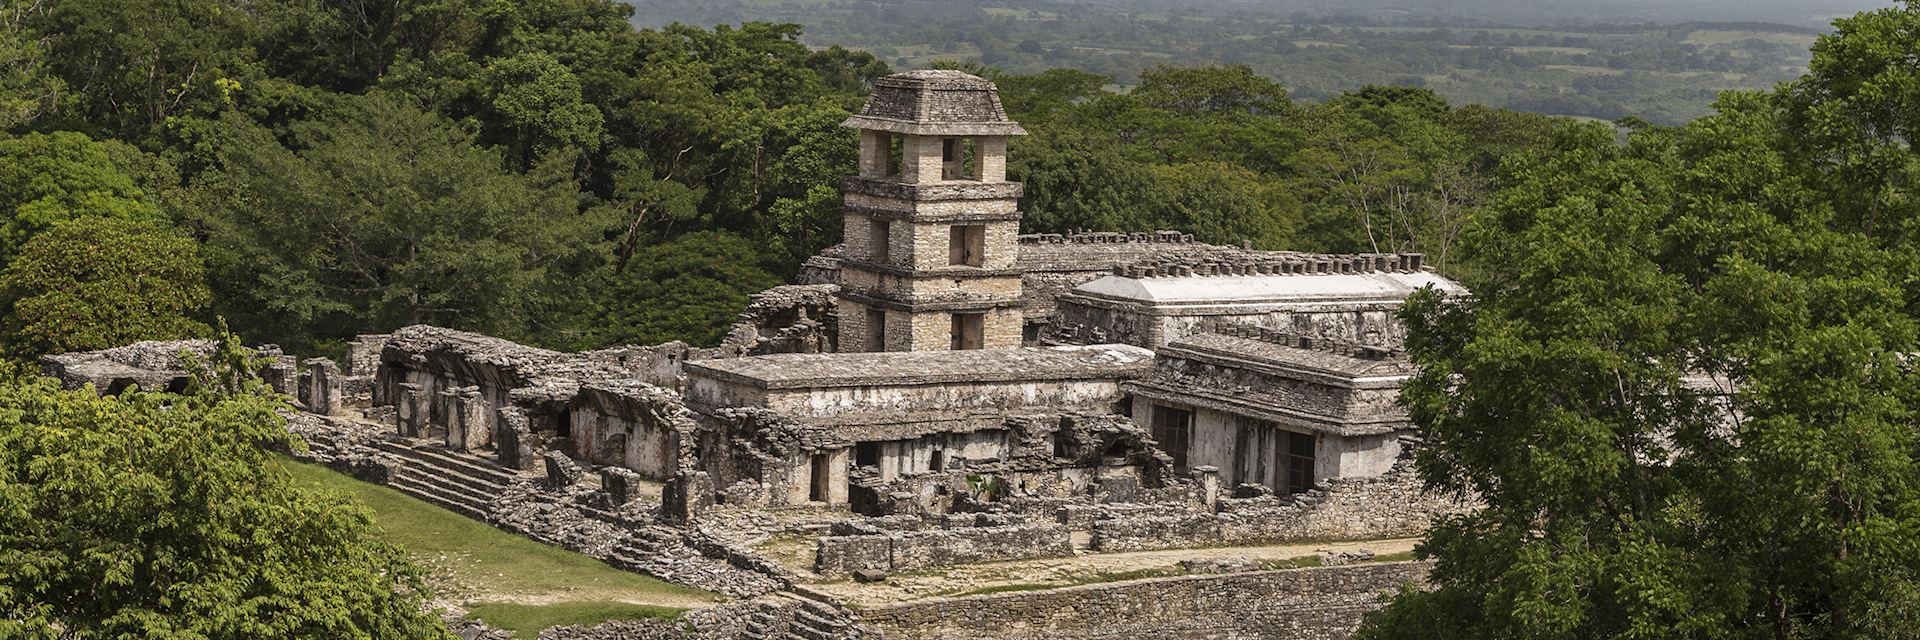 The ancient Mayan city of Palenque